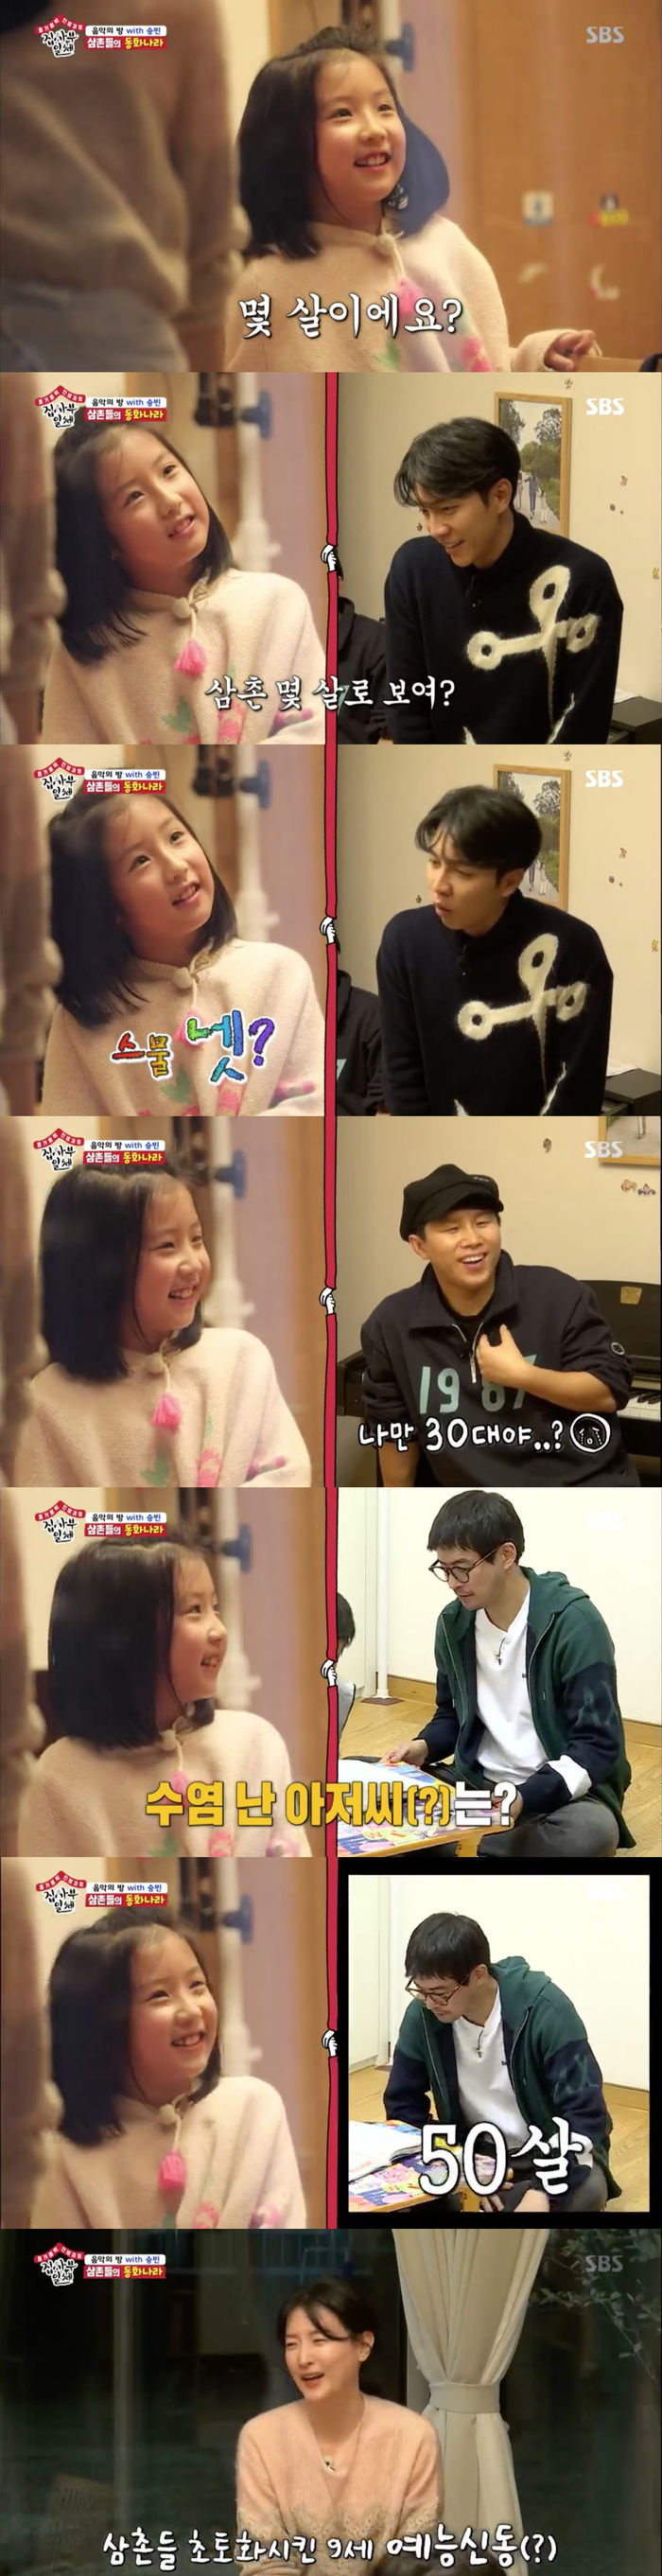 Lee Yeong-aes daughter showed off her entertainment.On SBS All The Butlers broadcasted on the 1st, the daughter of Master Lee Yeong-ae and the Uncle were shown to have a good time.On this day, Seung Bin sang with Lee Seung-gi and Yook Sungjae and made memories.Seung Bin asked Yook Sungjae to sing Let it go and took care of Elsas headband.Since then, Seung Bin has been singing tomorrow to The Uncle, and Lee Yeong-ae has also watched this.After the song of Seung Bin, Lee Yeong-ae asked, Is there anything you want to know about The Uncles?So Seung Bin asked The Uncles how old he was. Lee Seung-gi said, How old do you look?, and Seung Bin said that he was a twenty four, and made Lee Seung-gi happy.Seung Bin then guessed the age of Yook Sungjae and Yang Se-hyeong as one of twenty and thirty.The Uncles mentioned Lee Sang-yoon, So how old do you look like the bearded uncle?Seung Bin said, Im 50, and made a laugh.Lee Seung-gi said, Seung Bin has a great entertainment feeling, and Yook Sungjae said, I see a little bit of Mr.I am laughing and laughing and saying everything. 